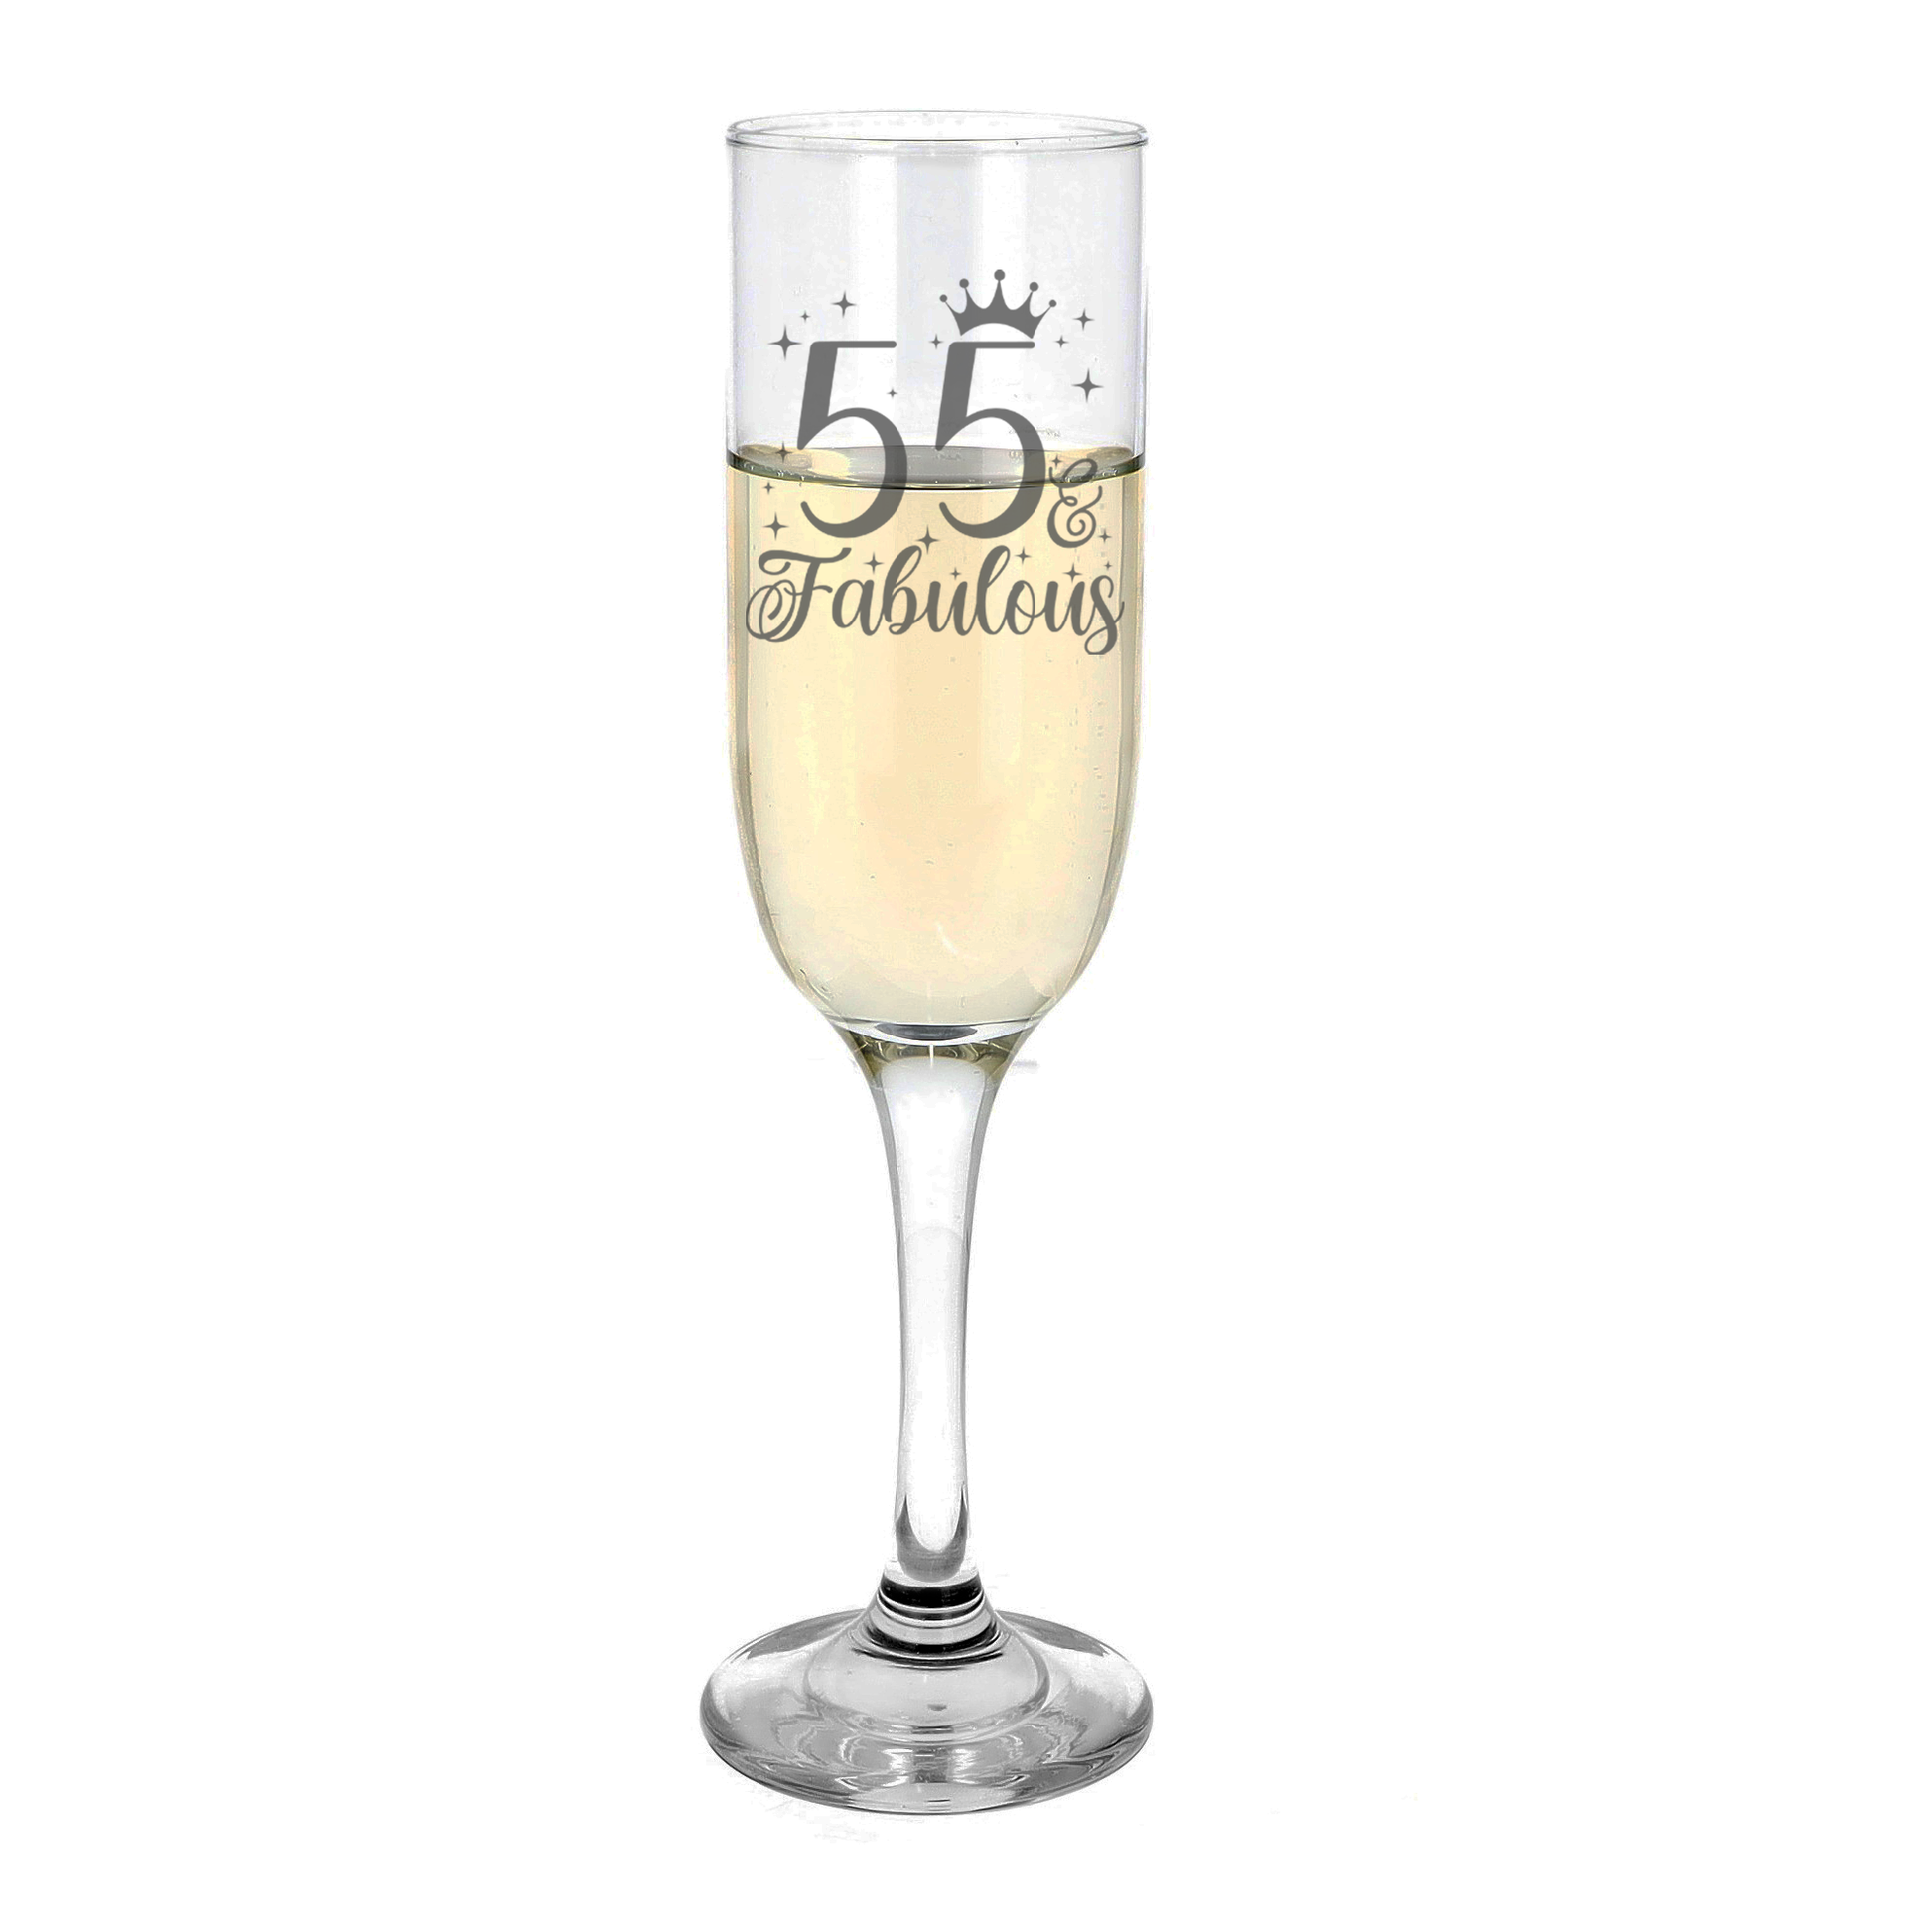 55 & Fabulous Engraved Champagne Glass and/or Coaster Set  - Always Looking Good -   